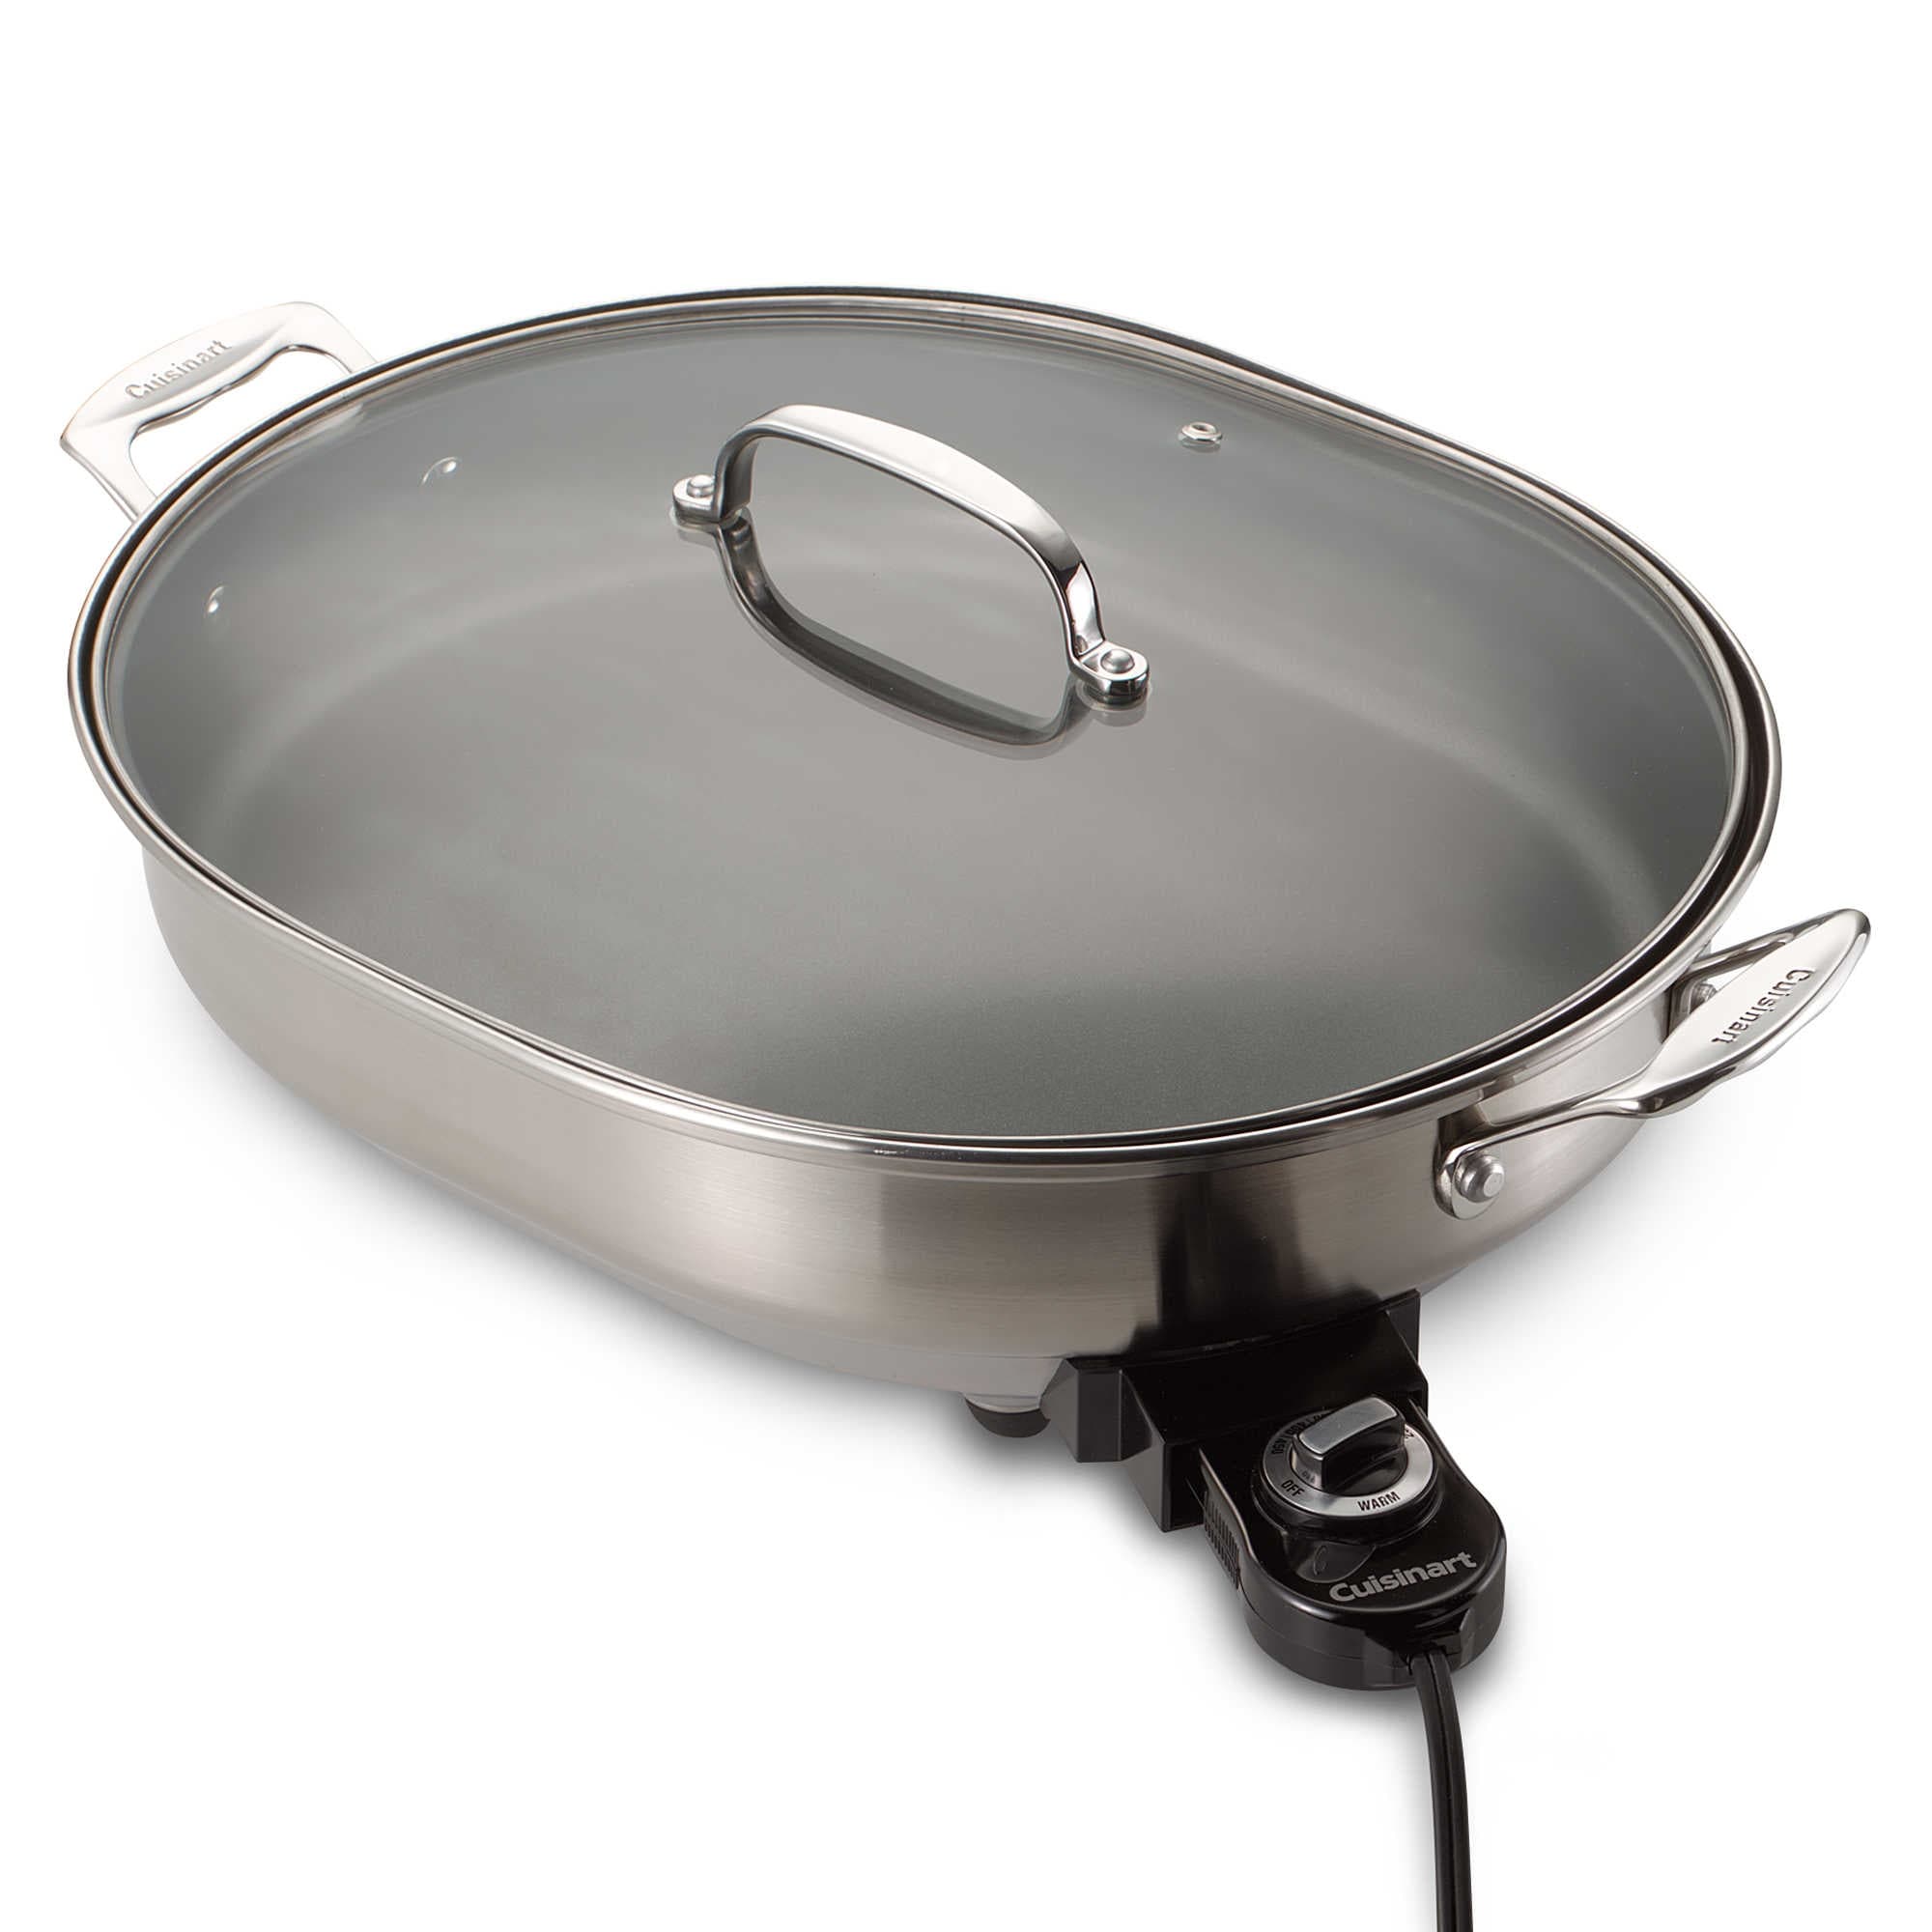 https://ak1.ostkcdn.com/images/products/is/images/direct/072ac95f66dcf46be84961deddca4f258fa51caf/Cuisinart-CSK-150-1500-Watt-Nonstick-Oval-Electric-Skillet%2C-Brushed-Stainless-Steel.jpg